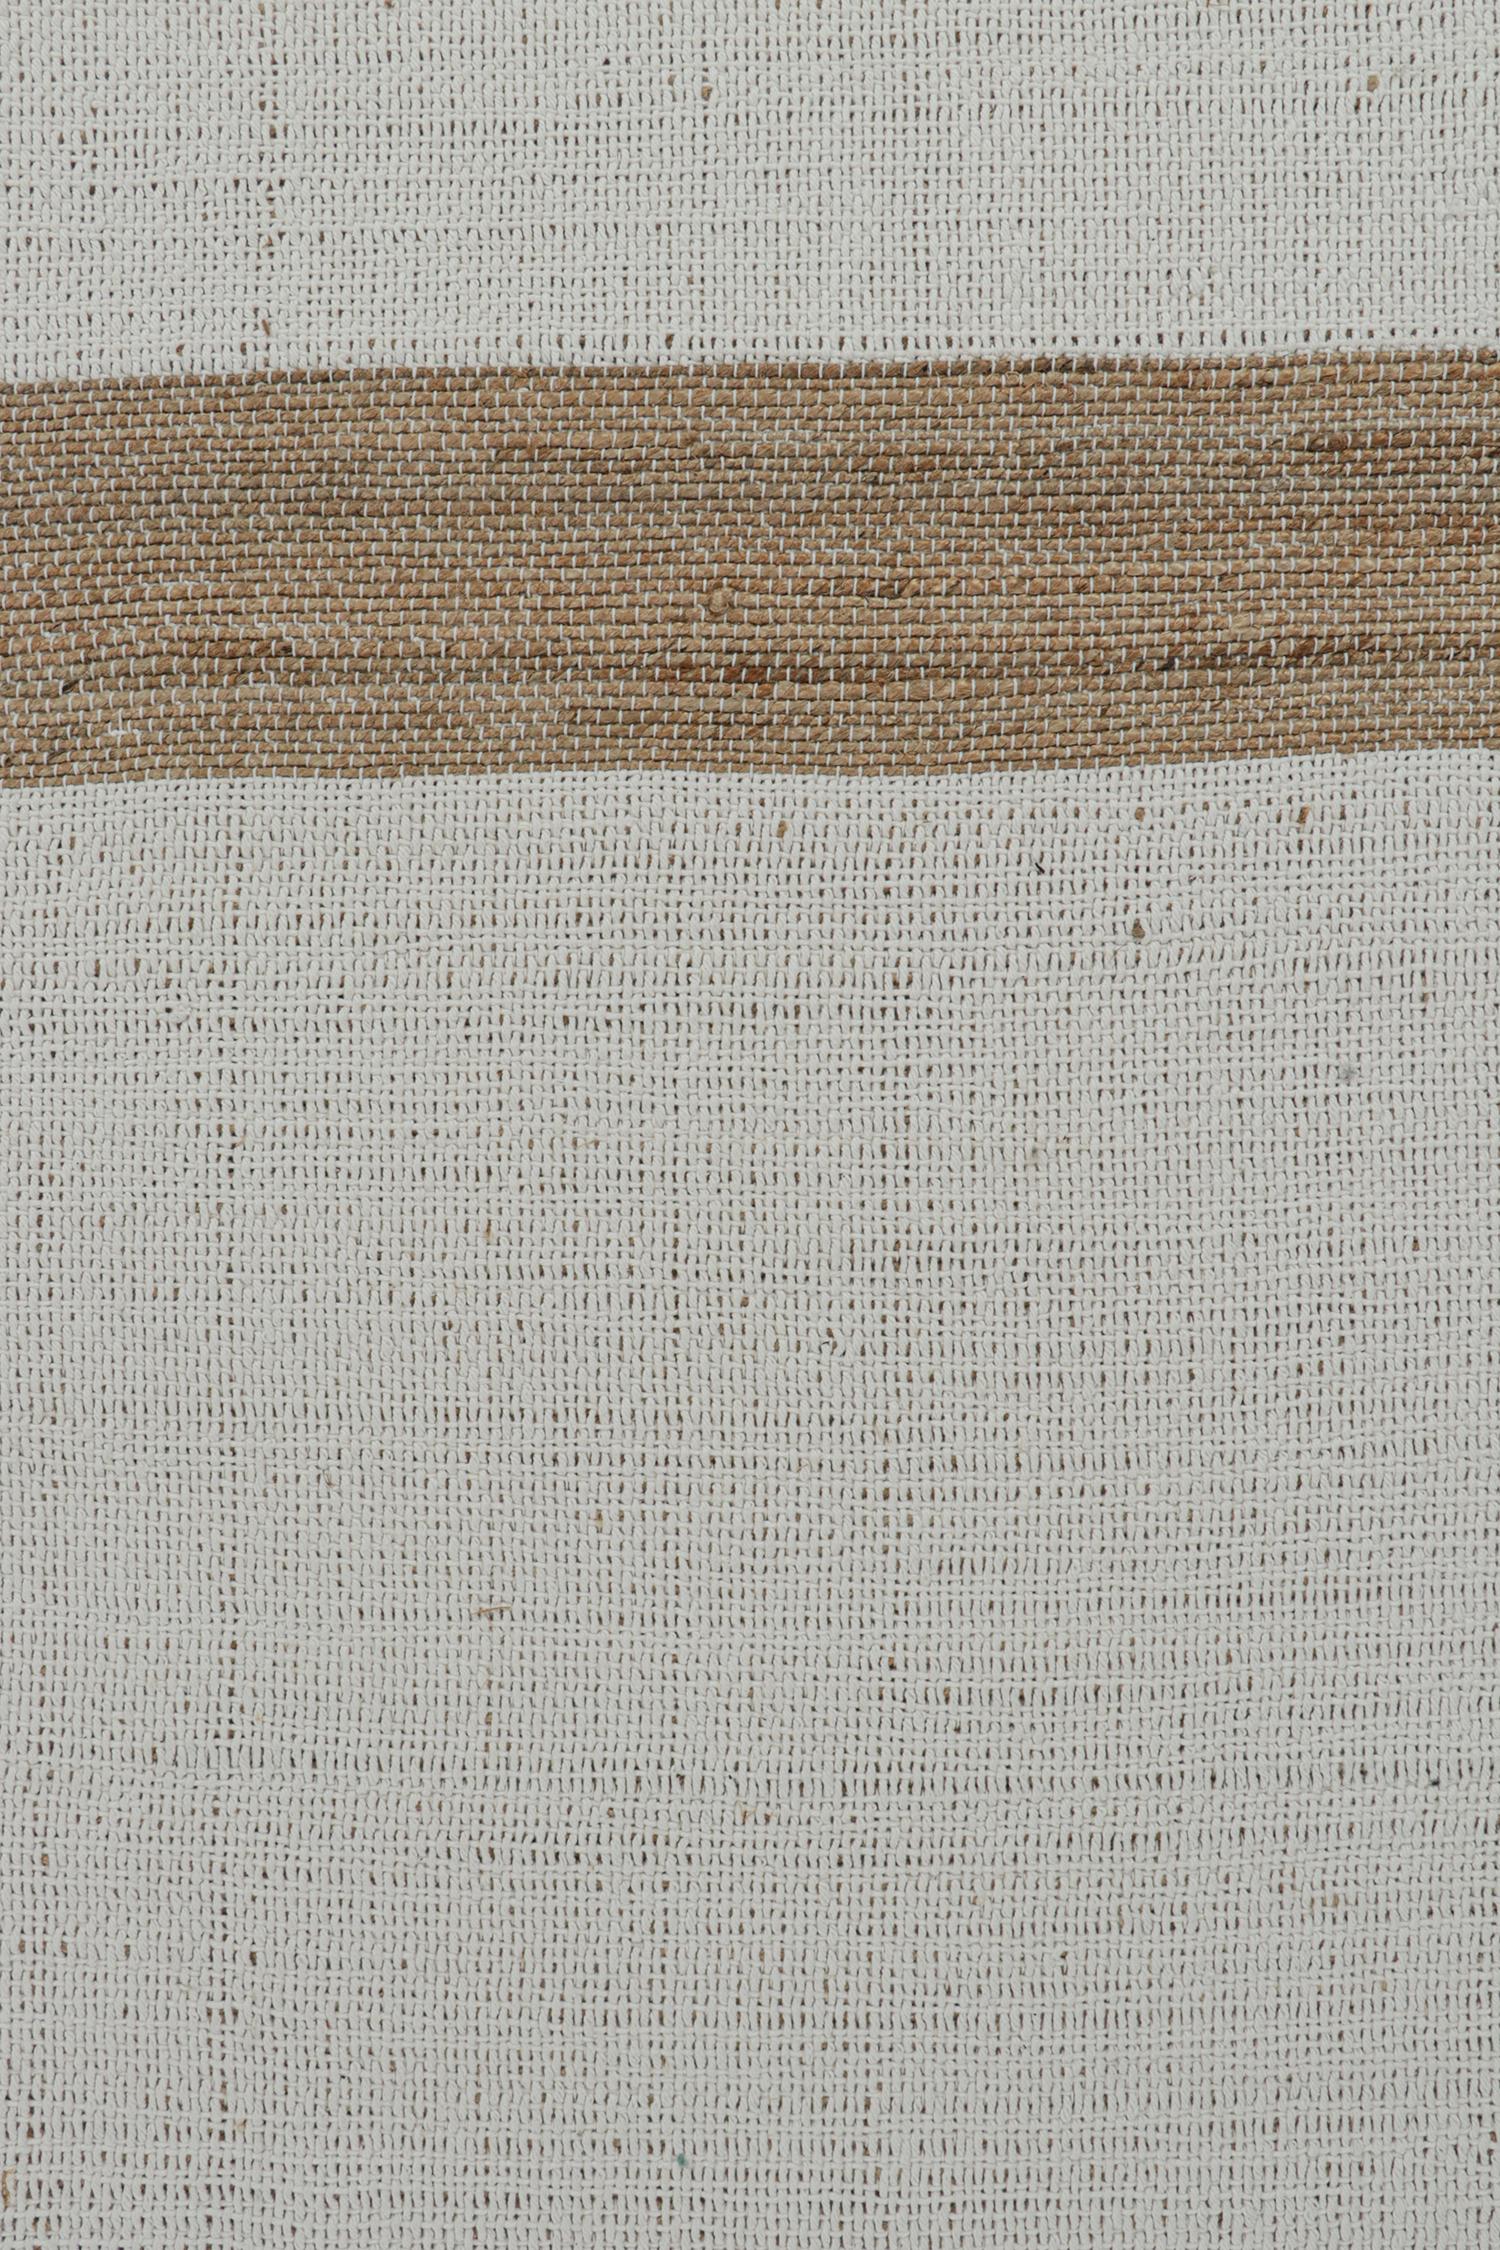 Rug & Kilim’s Contemporary Jute Flat Weave in White and Beige-Brown Stripes In New Condition For Sale In Long Island City, NY